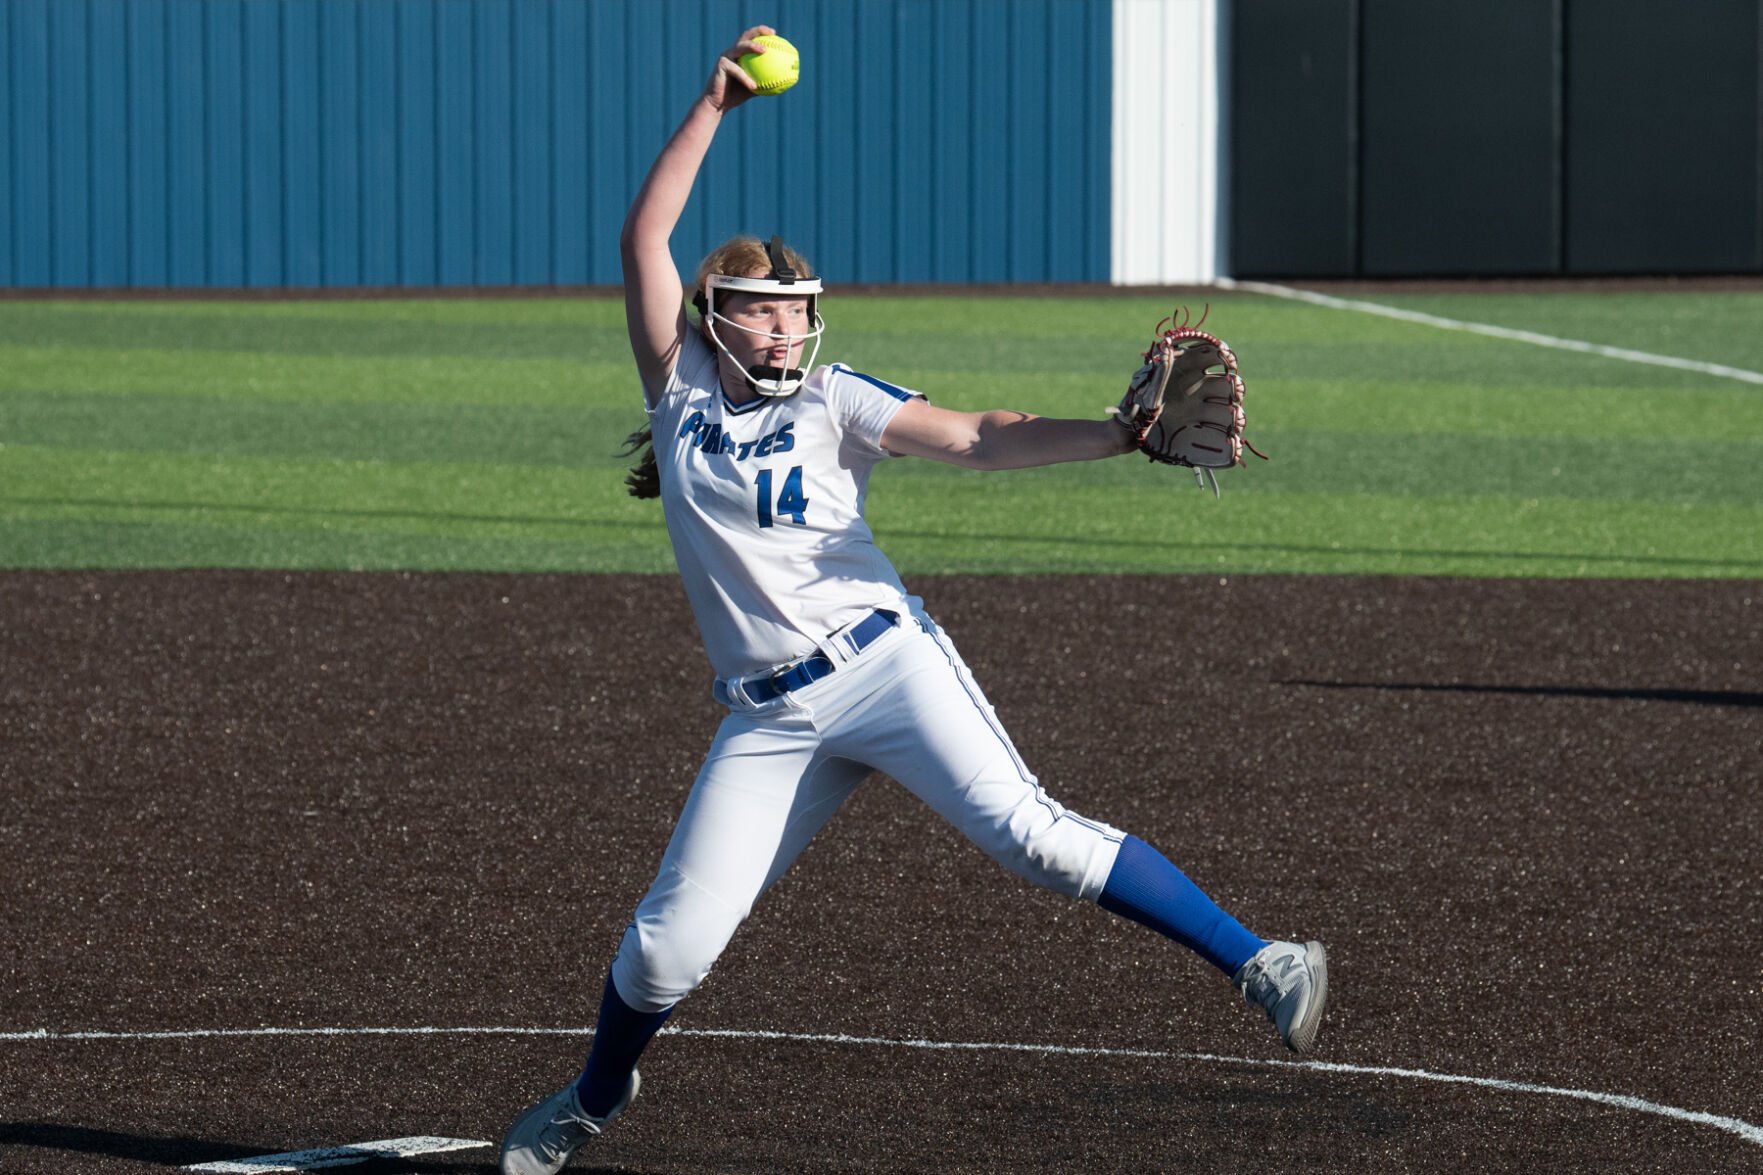 High School Softball Results: Burns and Gibson Shine in Victories